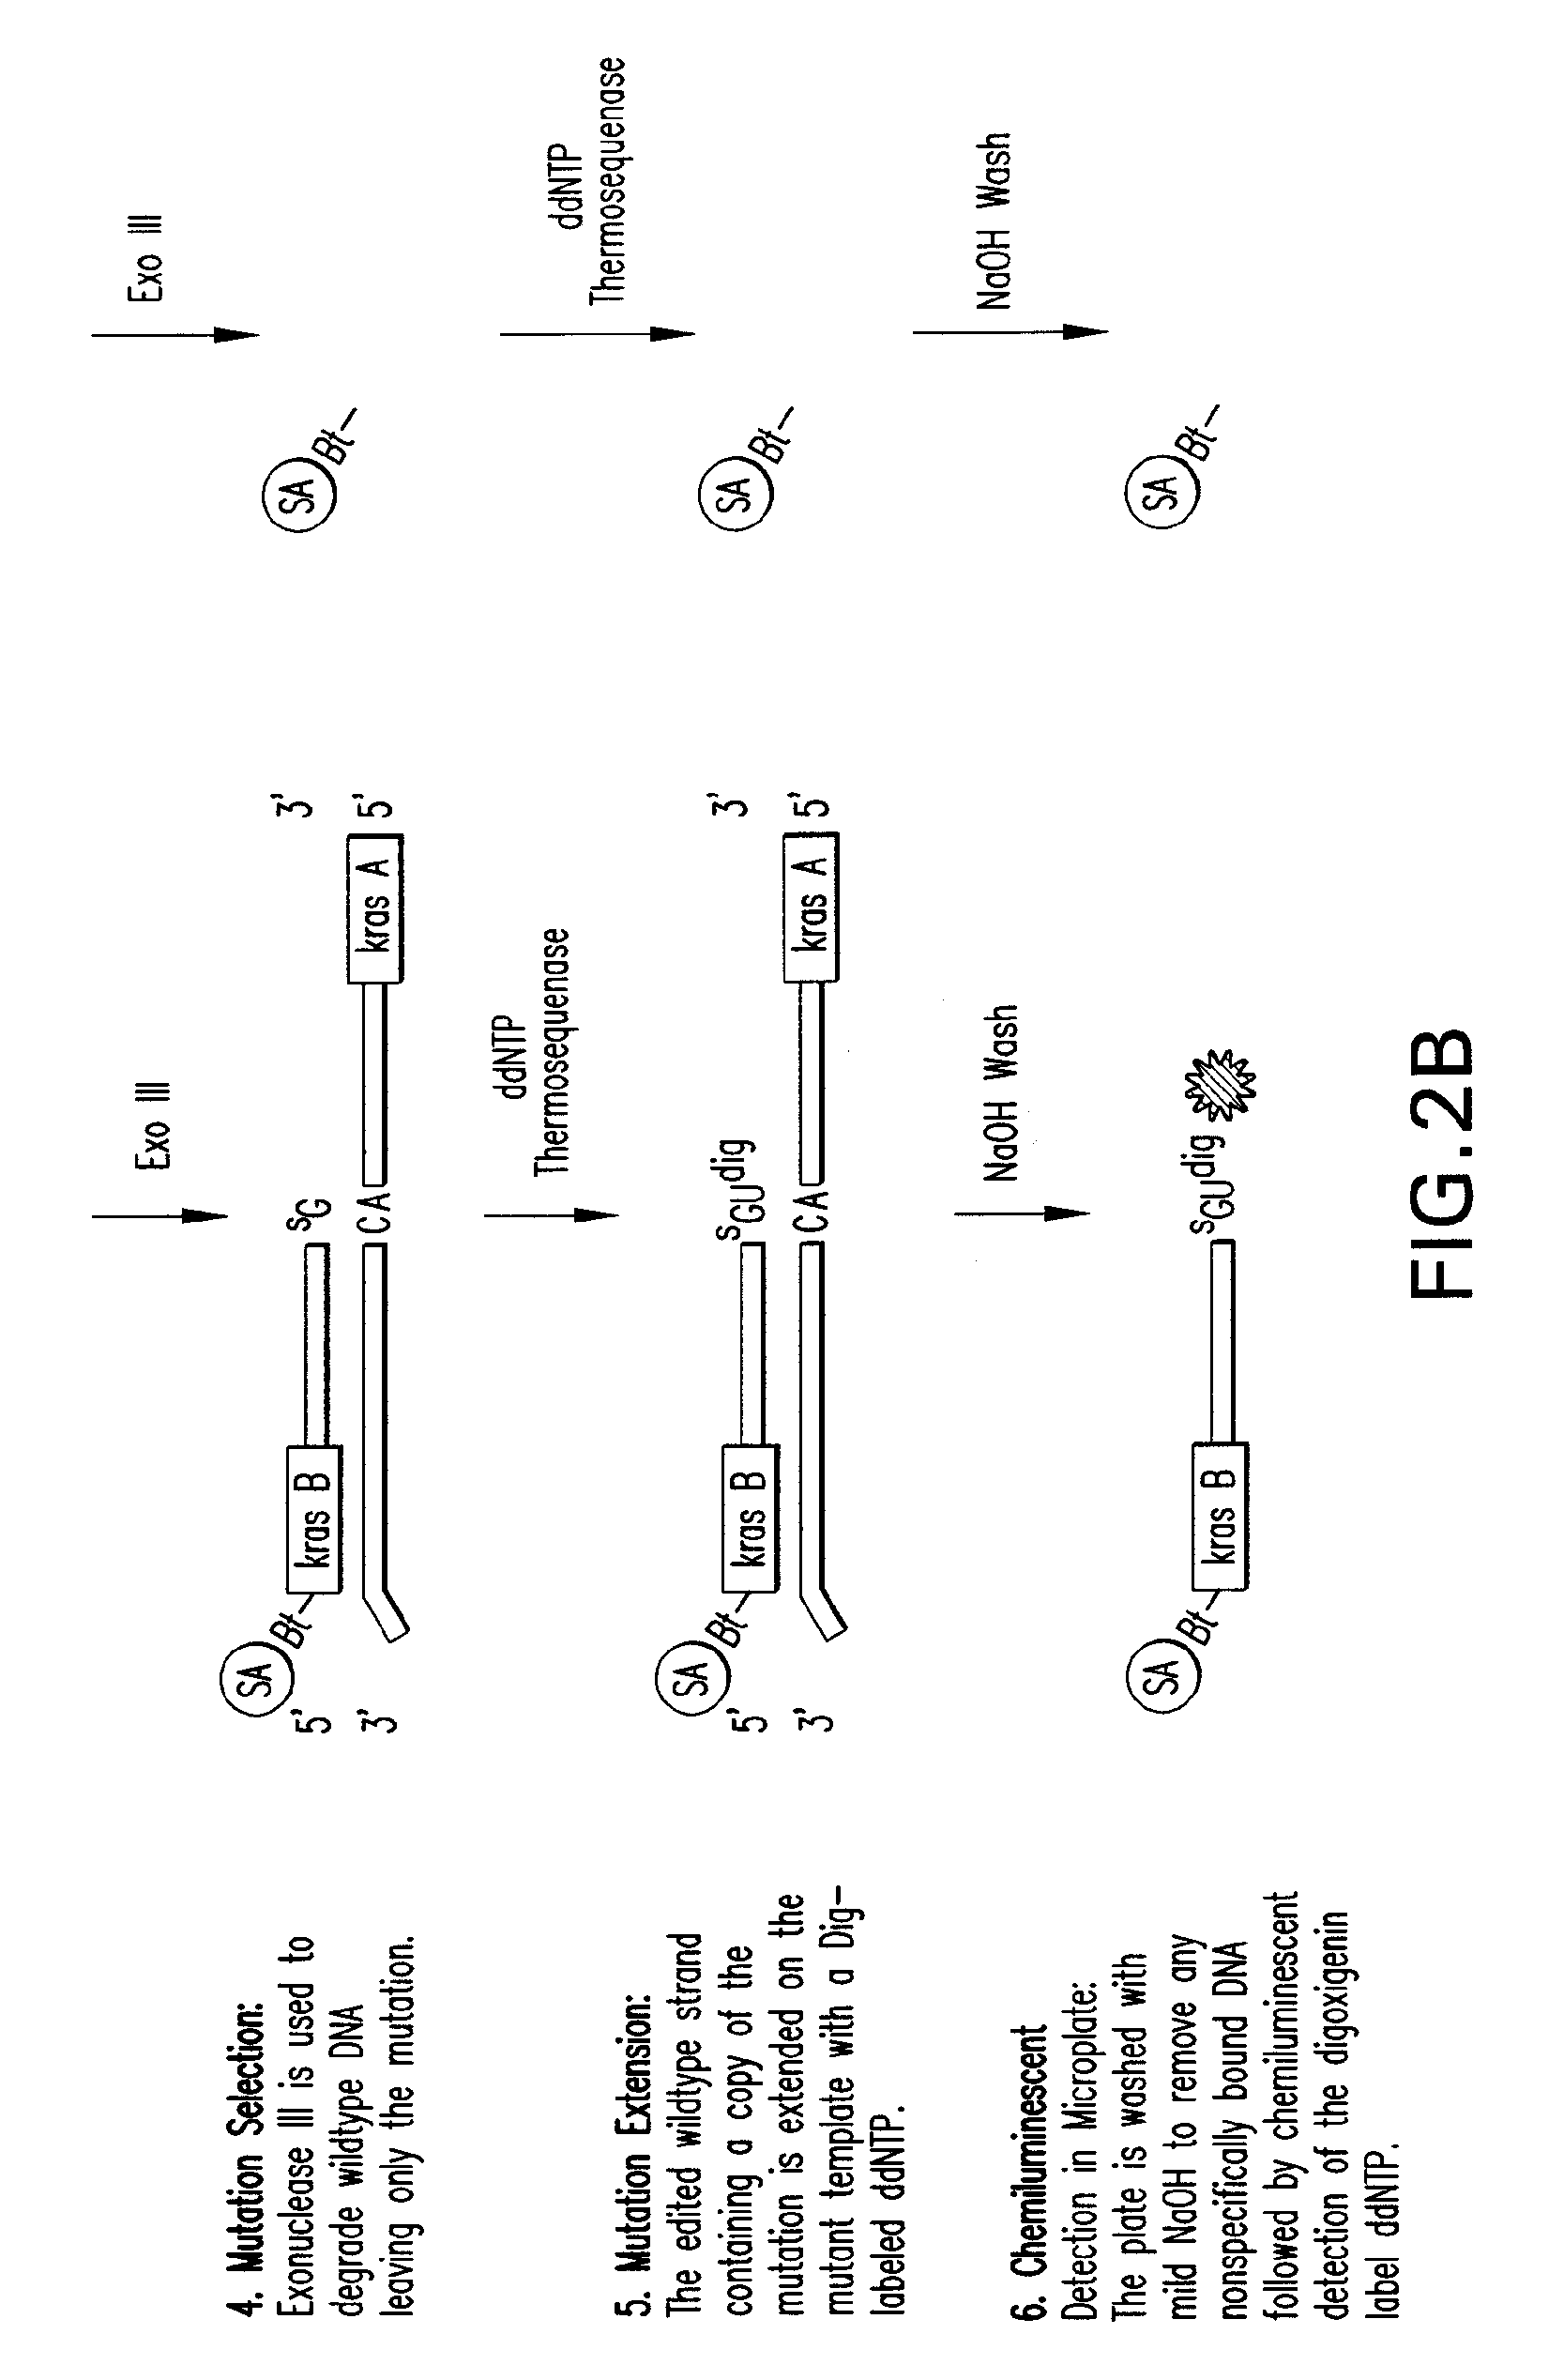 Methods of screening nucleic acids for single nucleotide variations